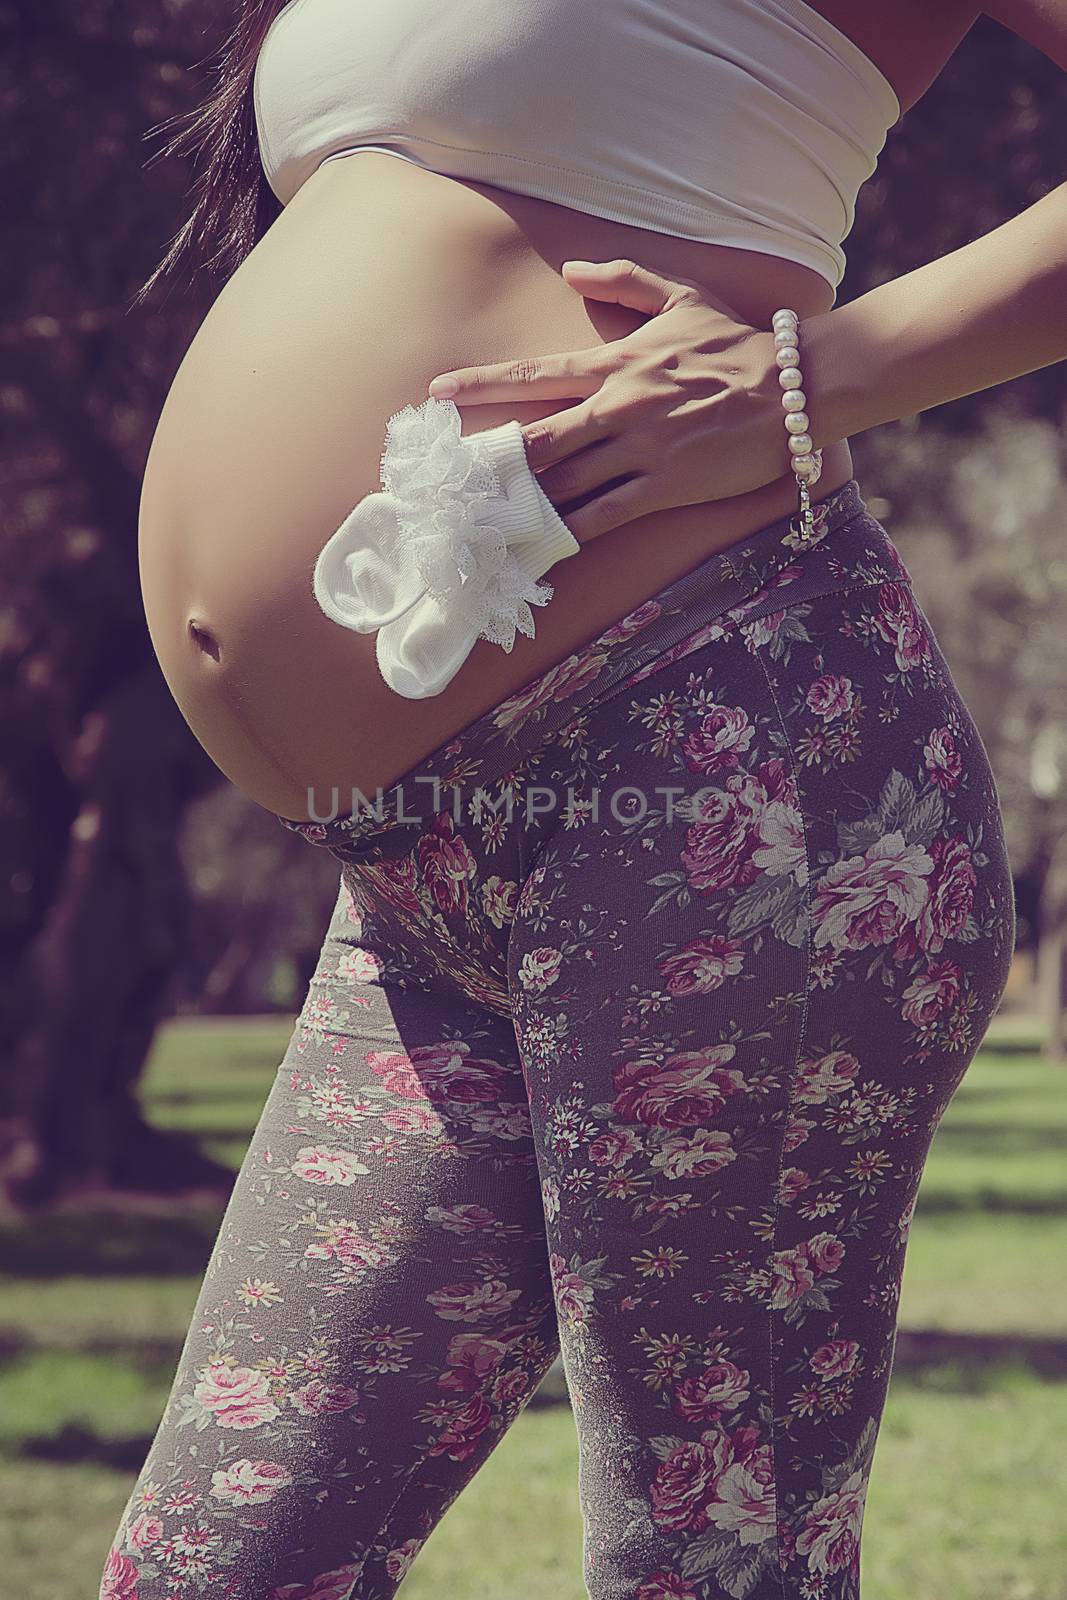 Pregnant with baby stocking by Peruphotoart